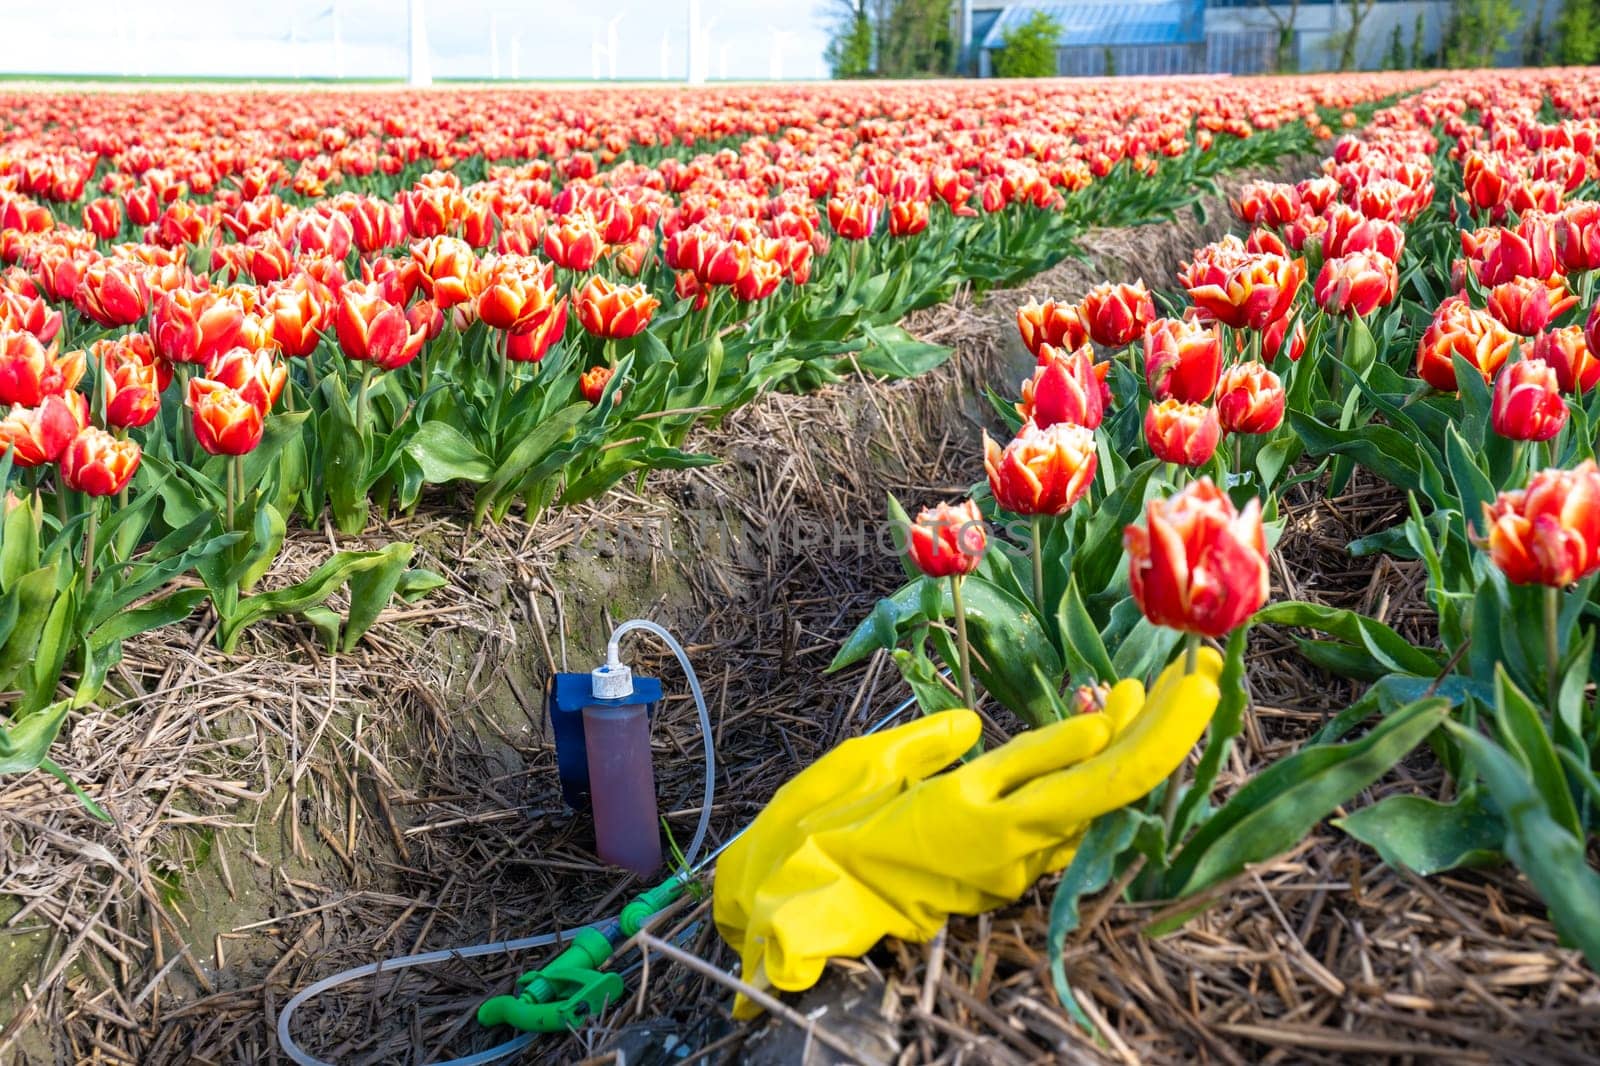 sprayer with pesticides and gloves on the ground with a colorful tulip field in the Netherlands by fokkebok